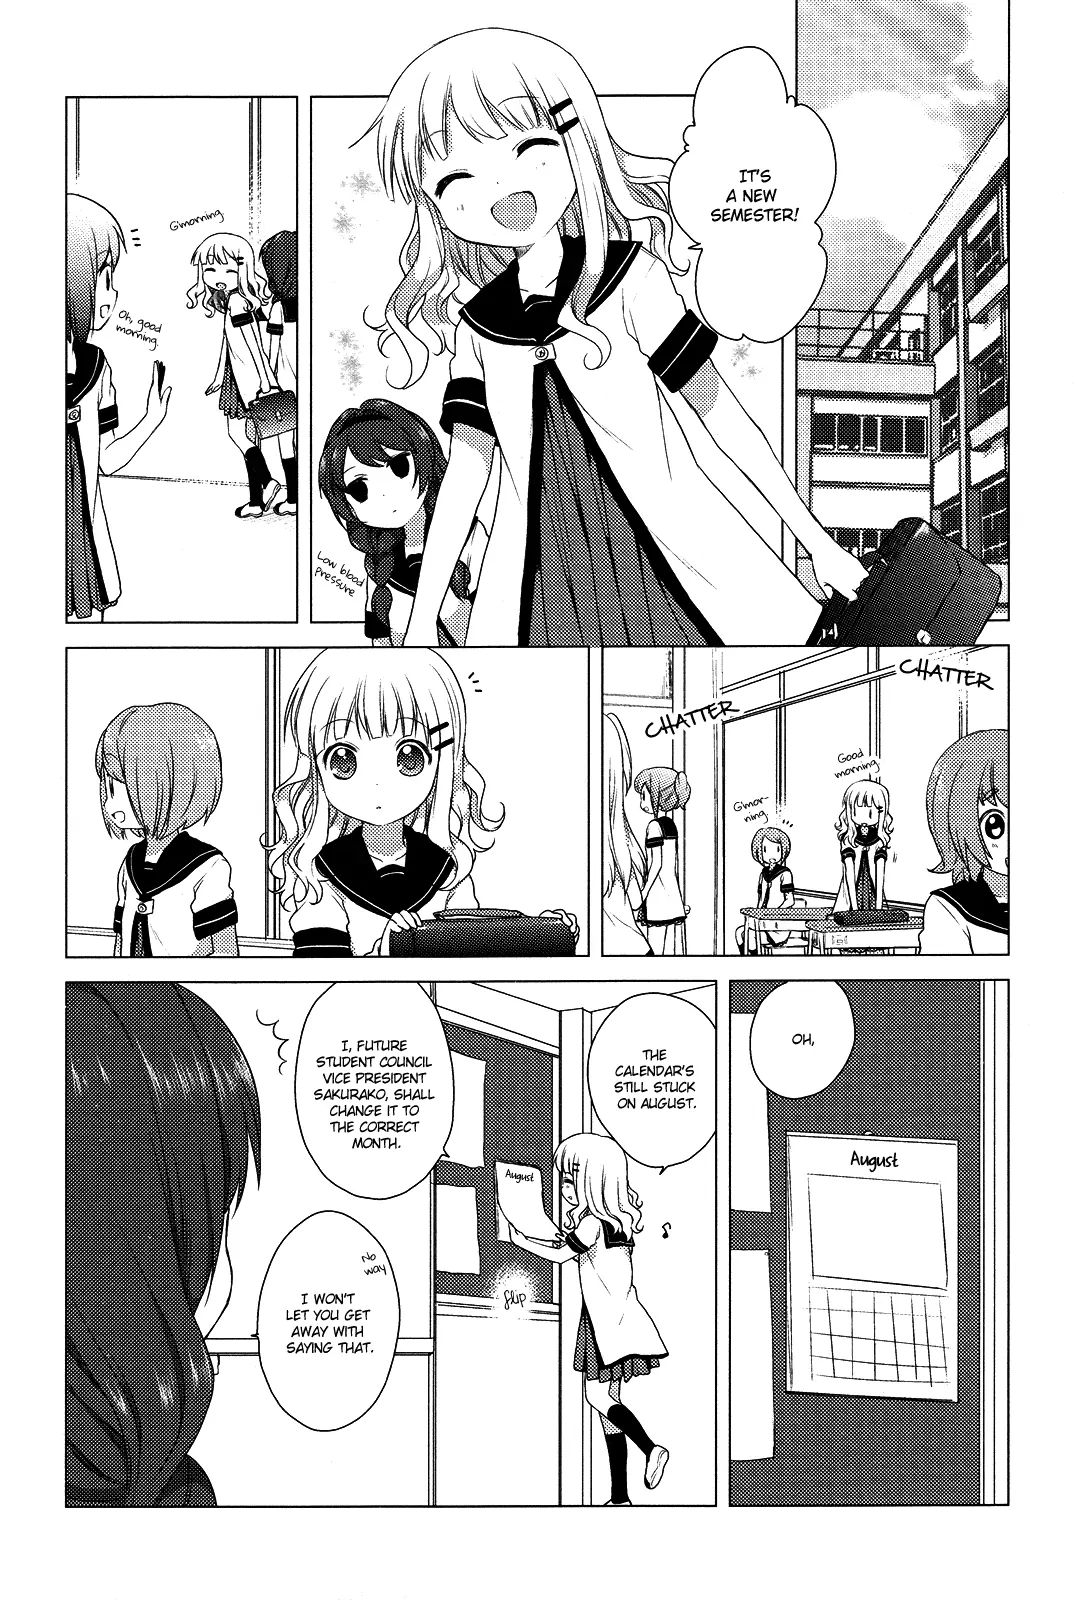 Yuru Yuri Vol.3 Chapter 23: We've Decided How To Manage Our Timeline - Picture 3